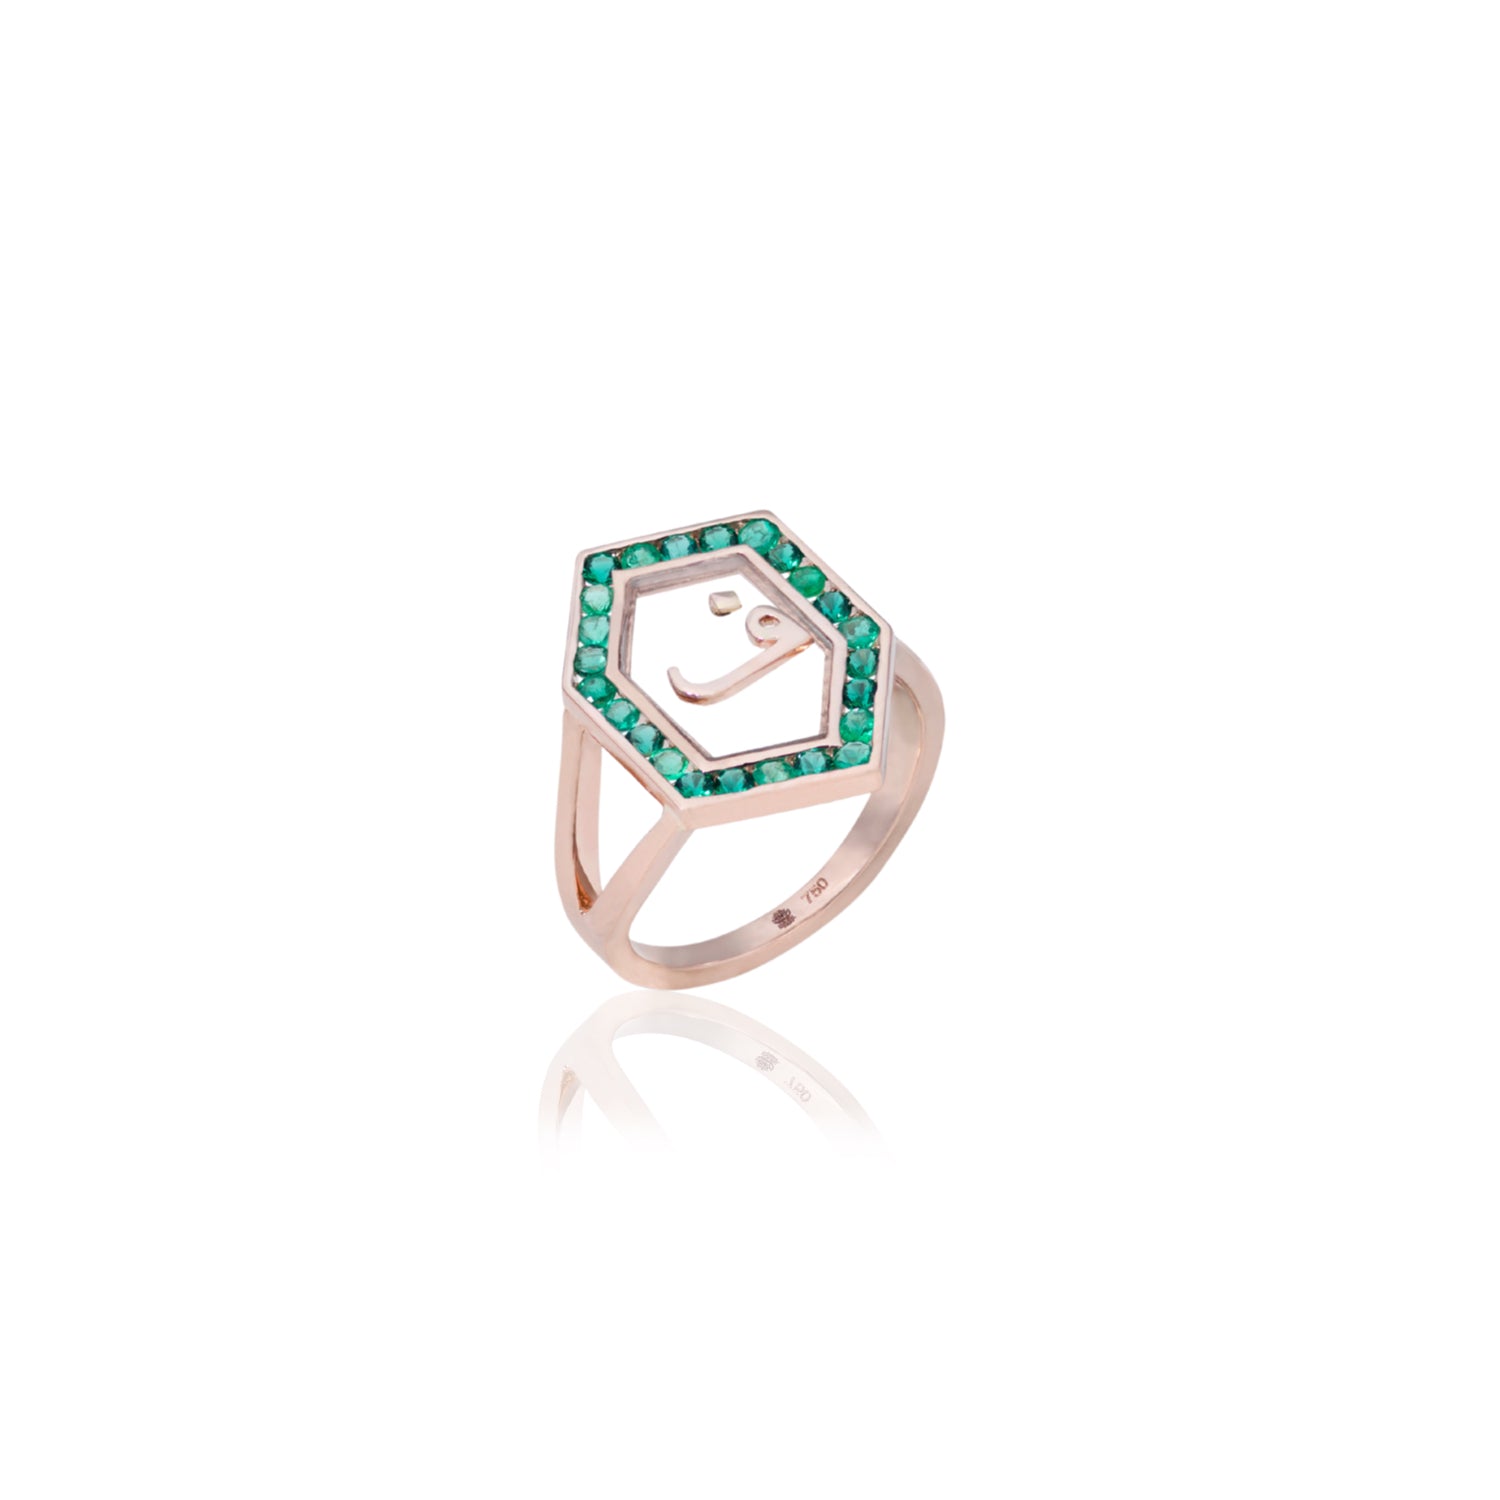 Qamoos 1.0 Letter ف Emerald Ring in Rose Gold